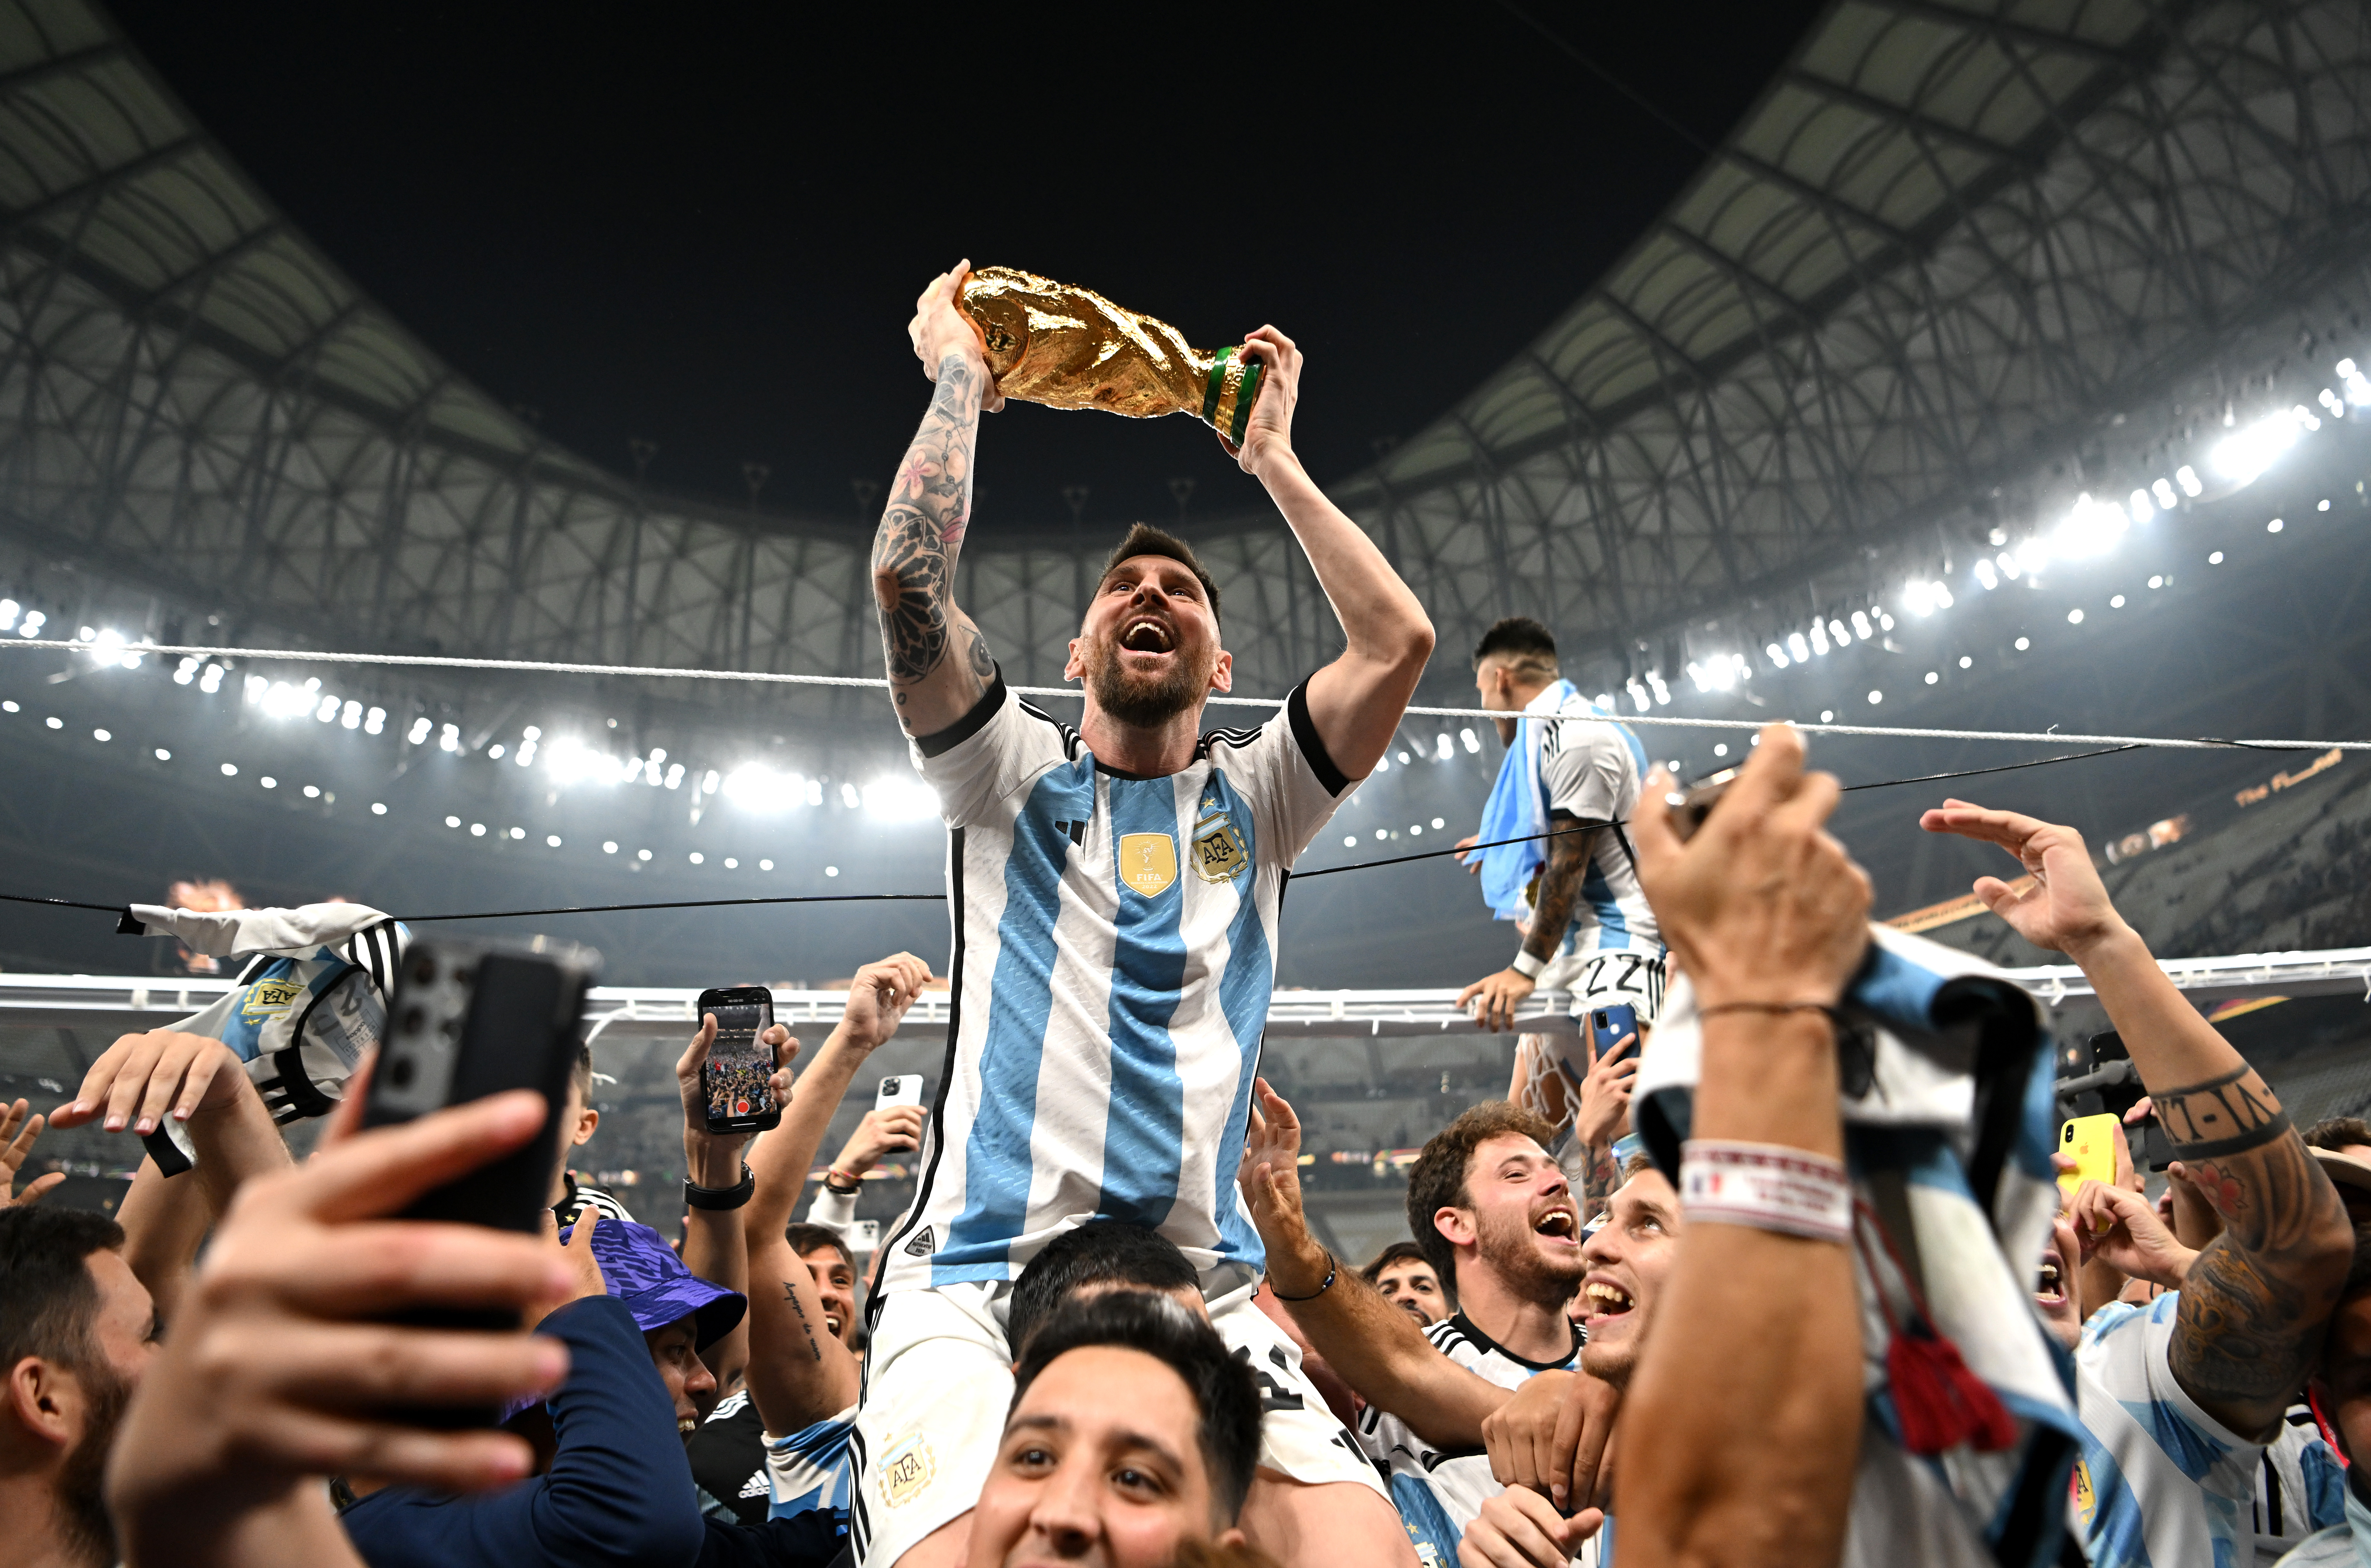 Photographer reveals 'luck' behind Messi World Cup image that set